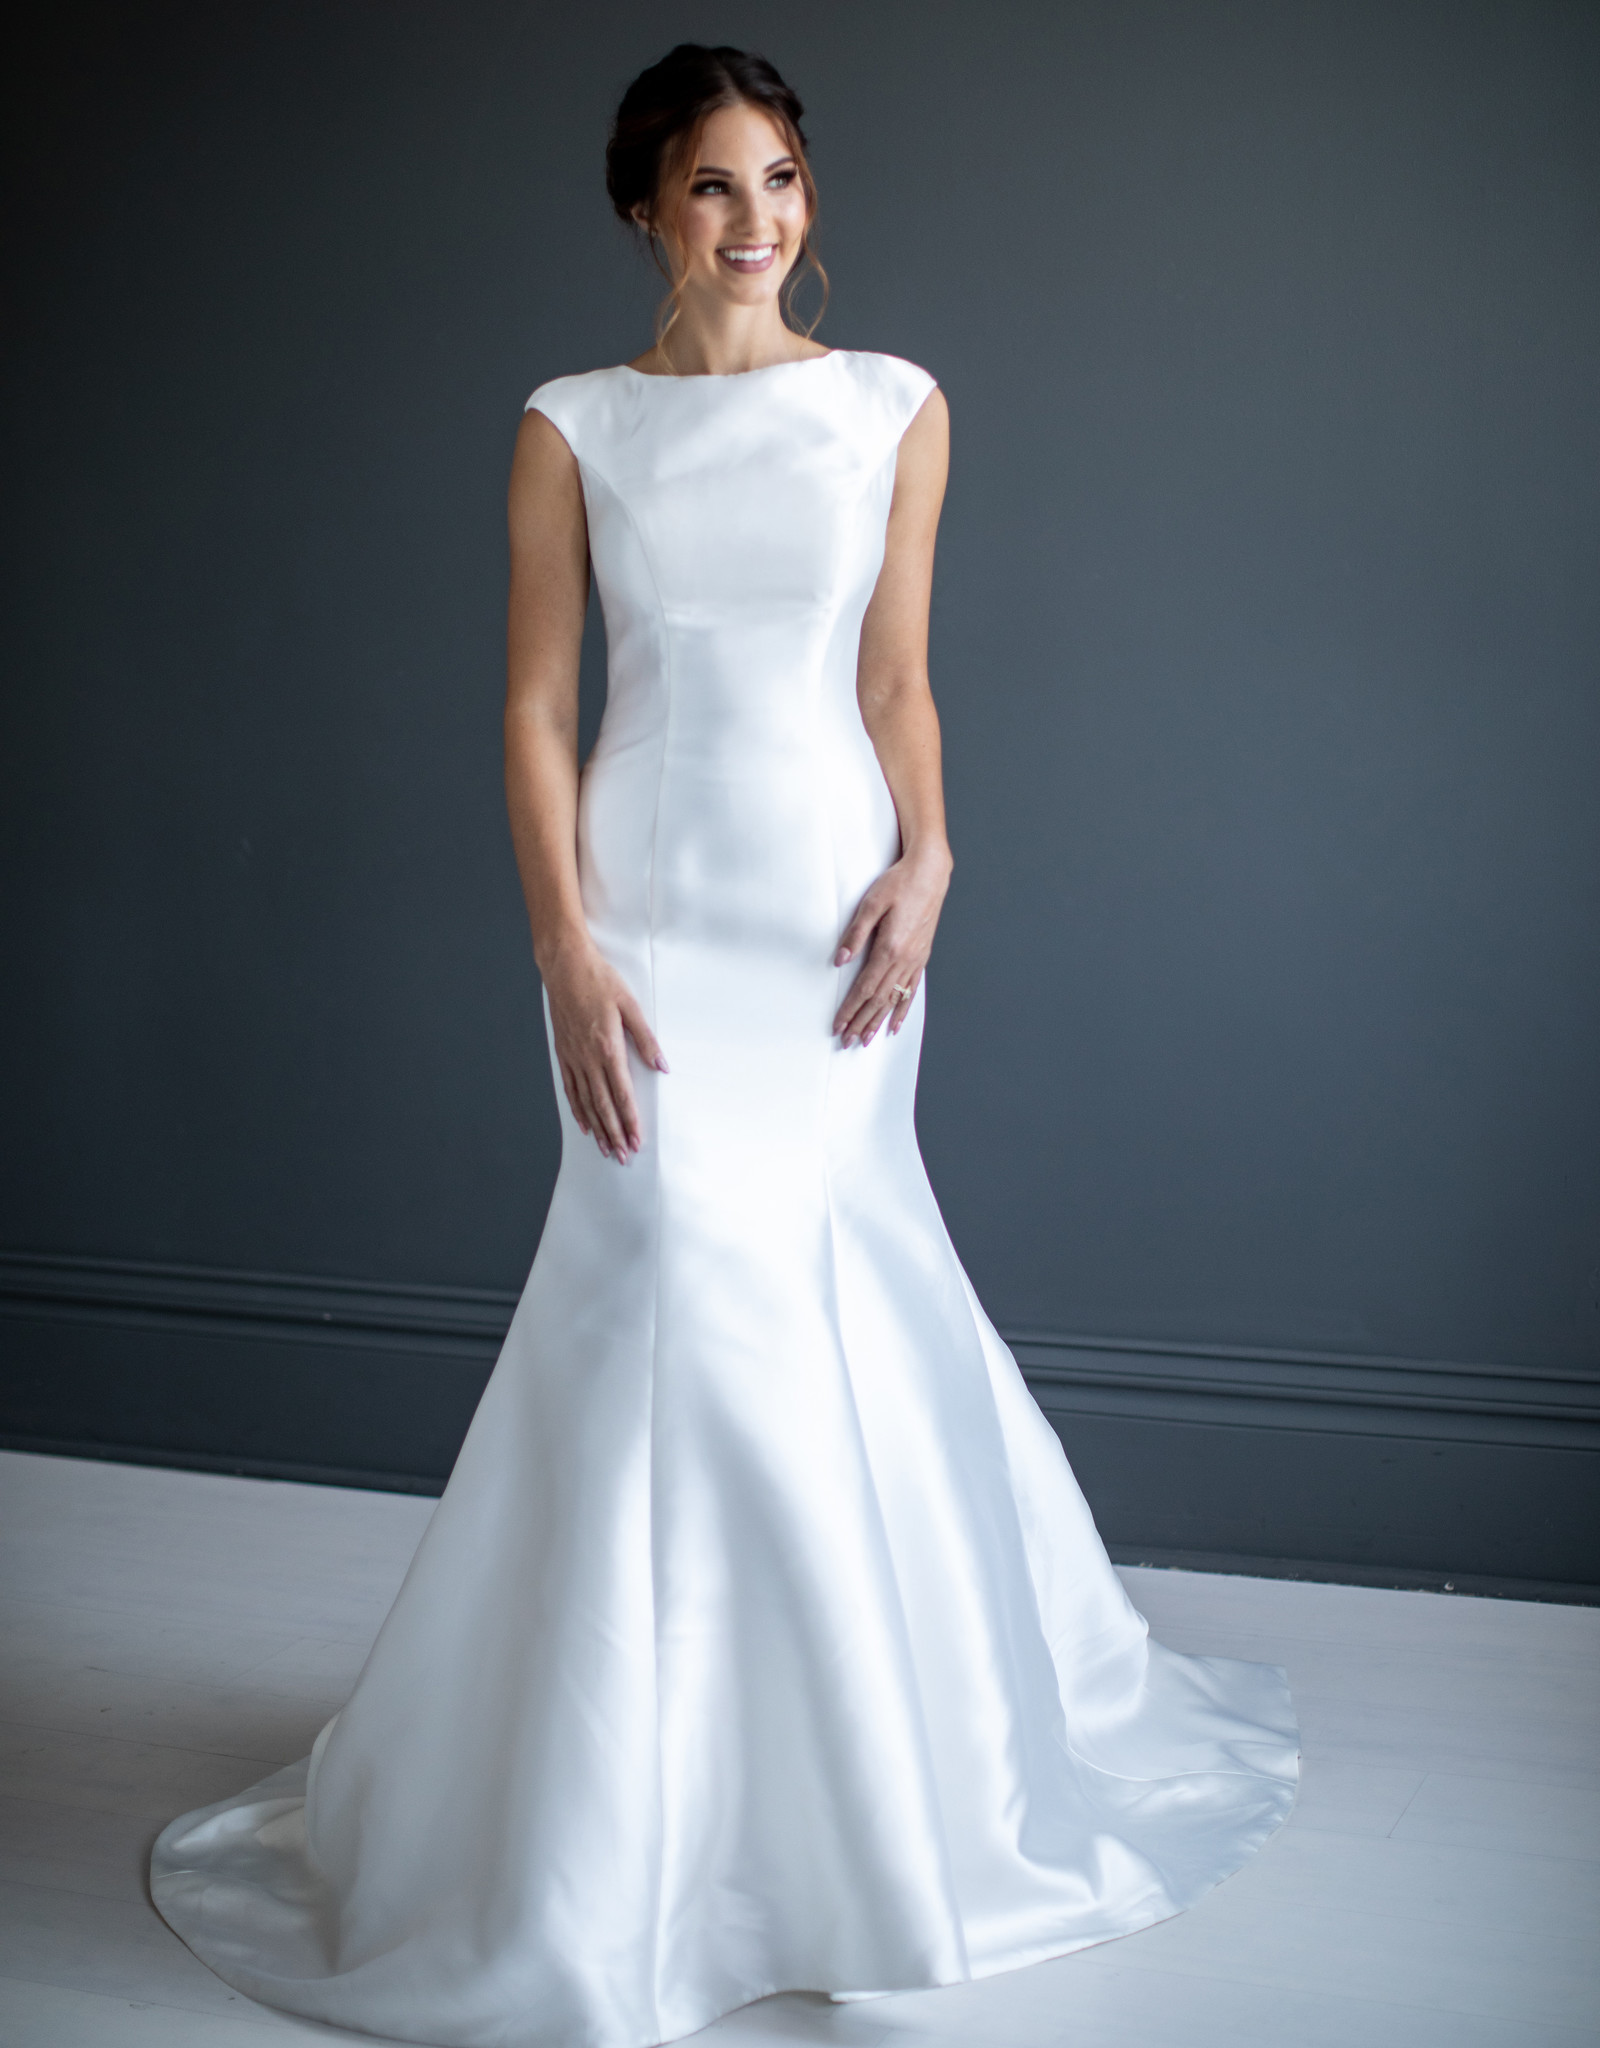 The Modest Bridal Collection Sydney